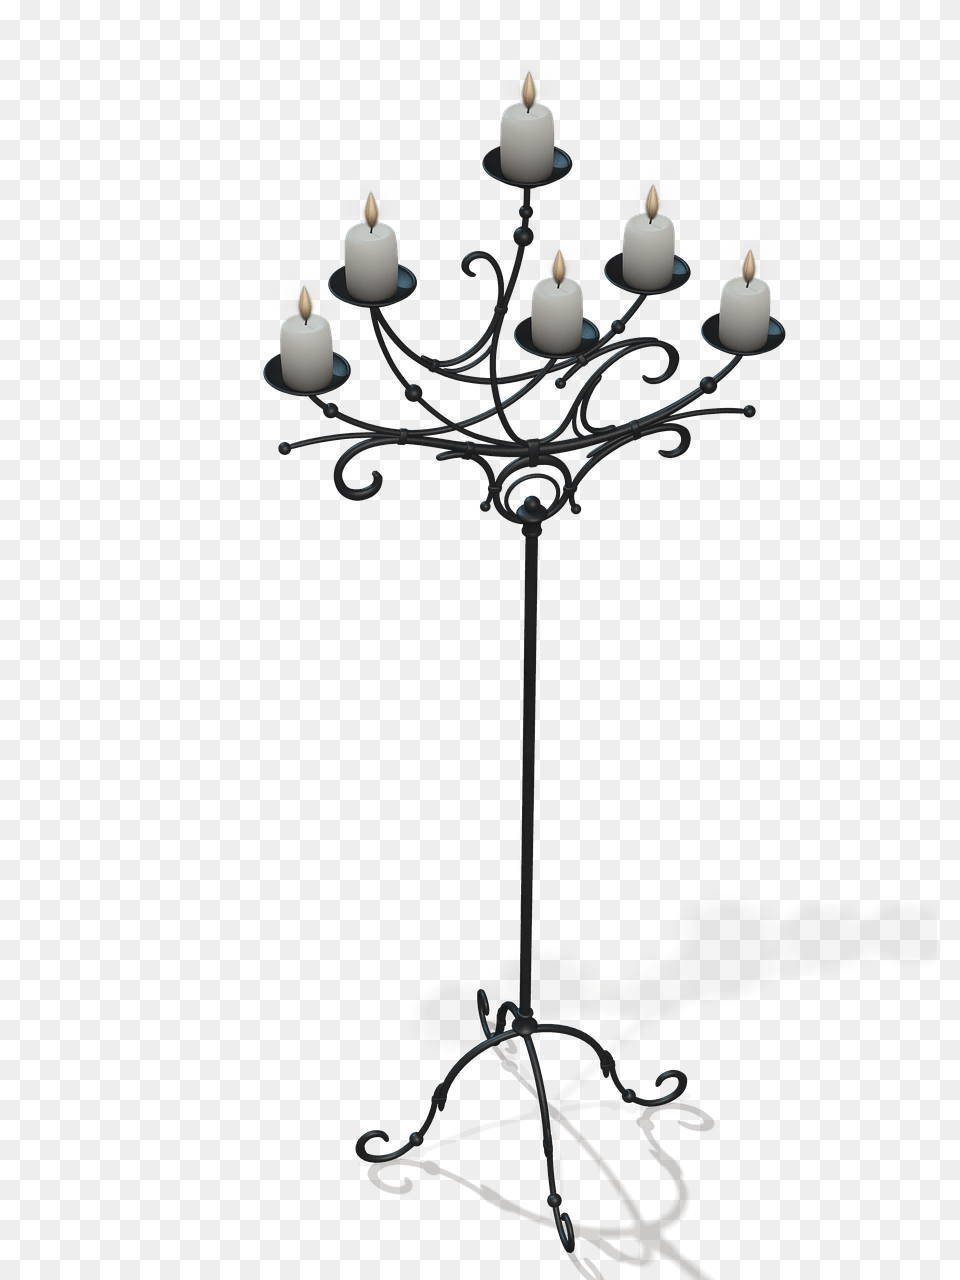 Candles On Black Stand, Candle, Festival, Hanukkah Menorah Free Png Download